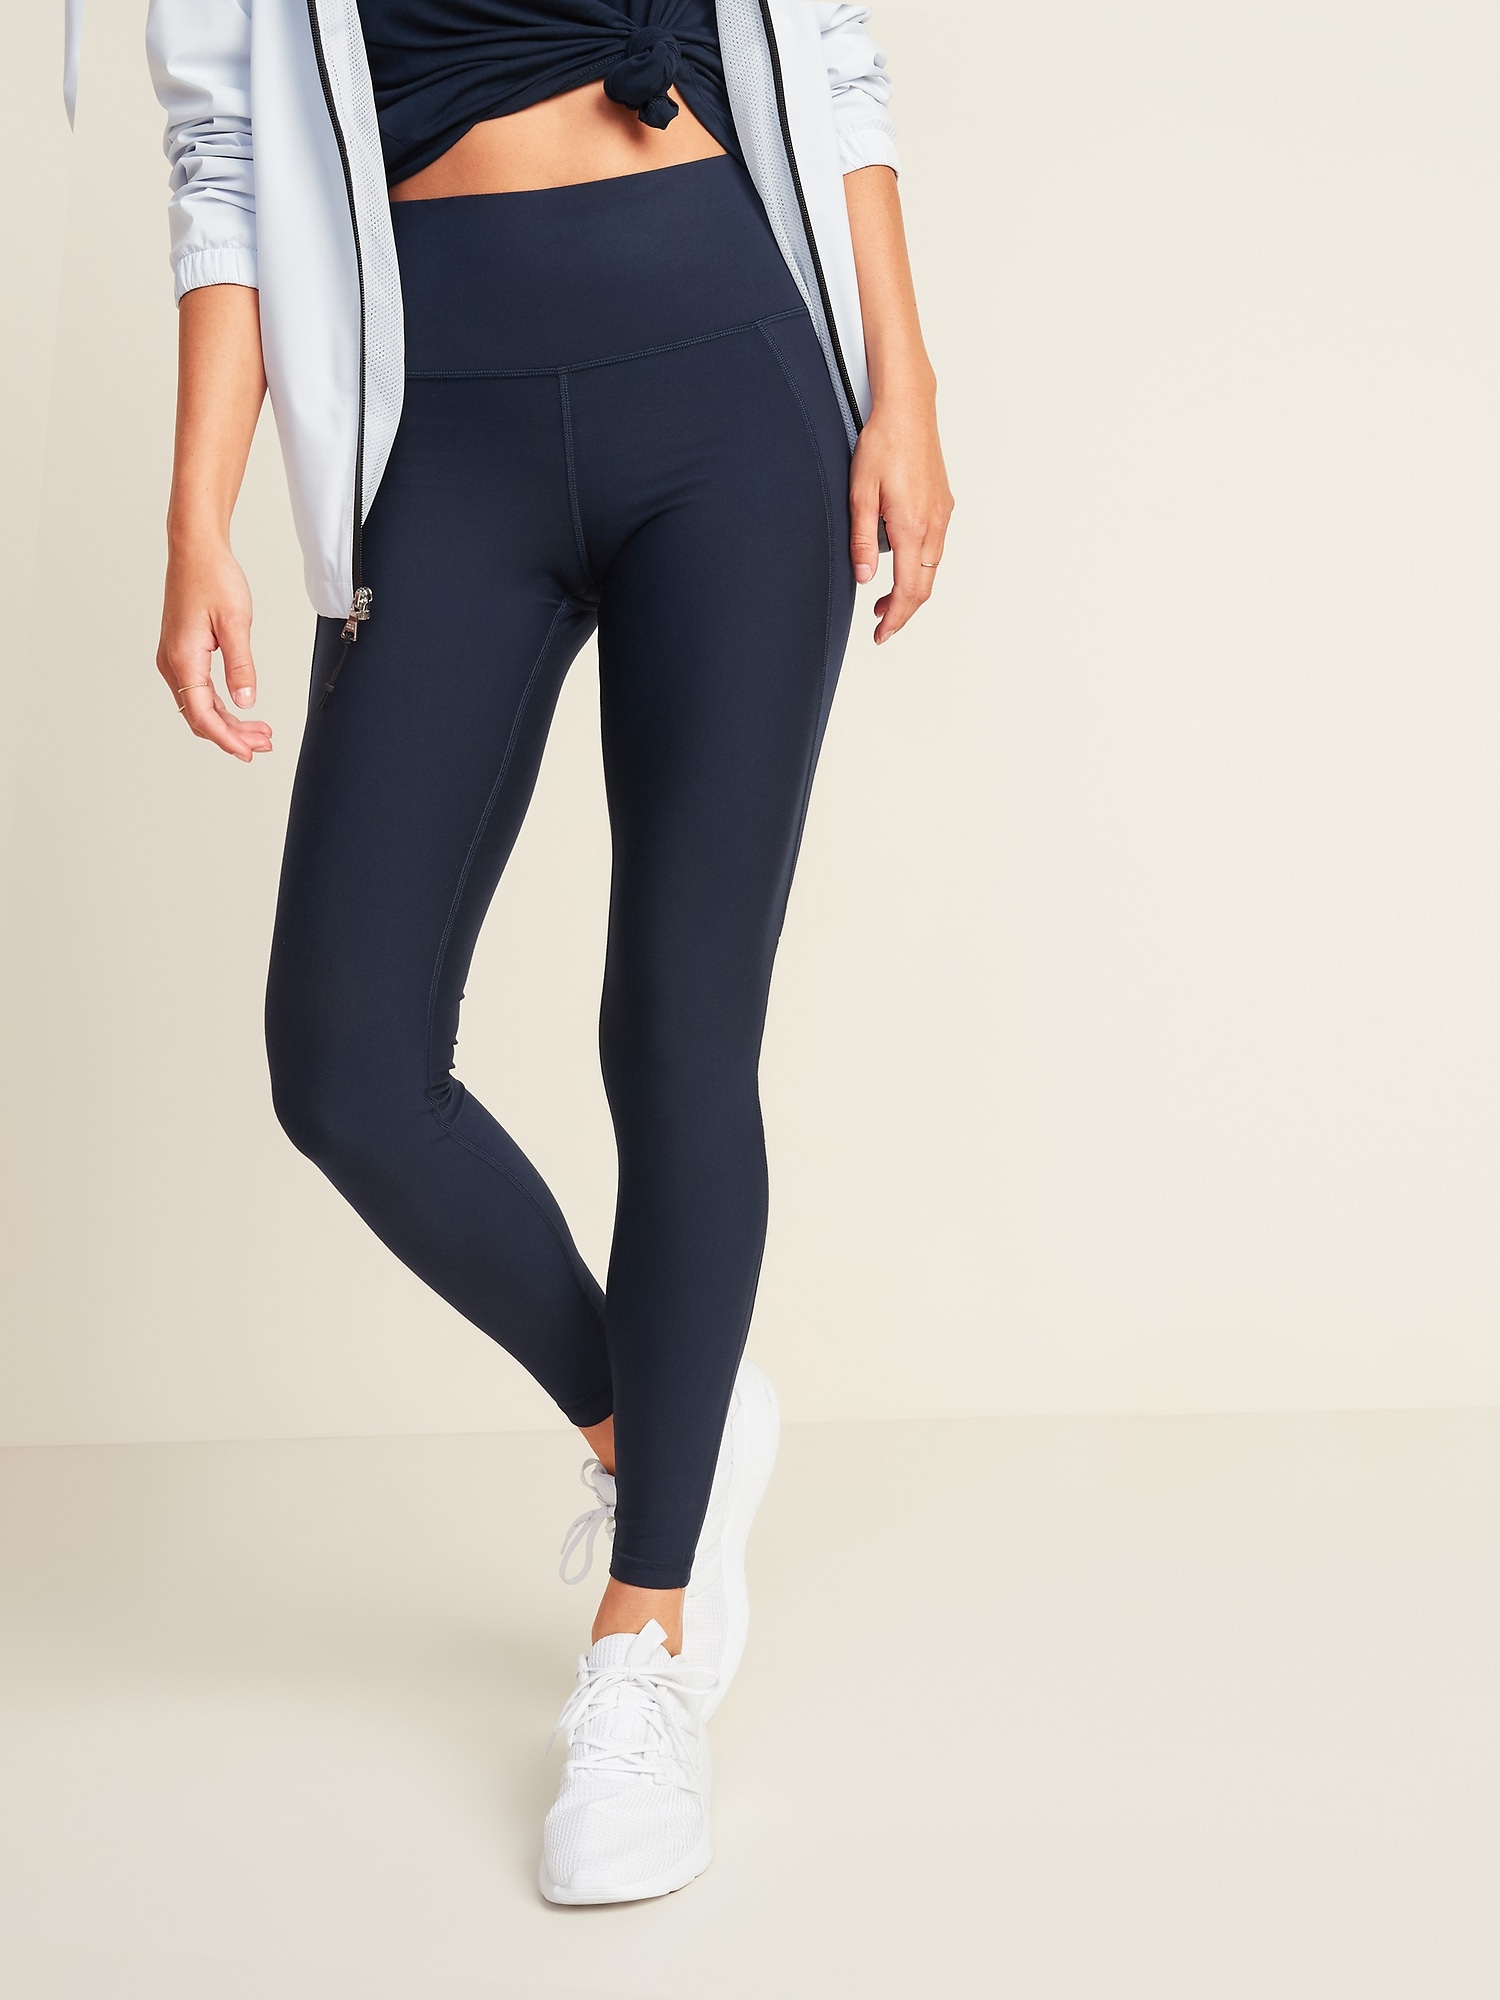 Old Navy Women's Elevate Go-Dry Compression Leggings - Capri workout pants  Small